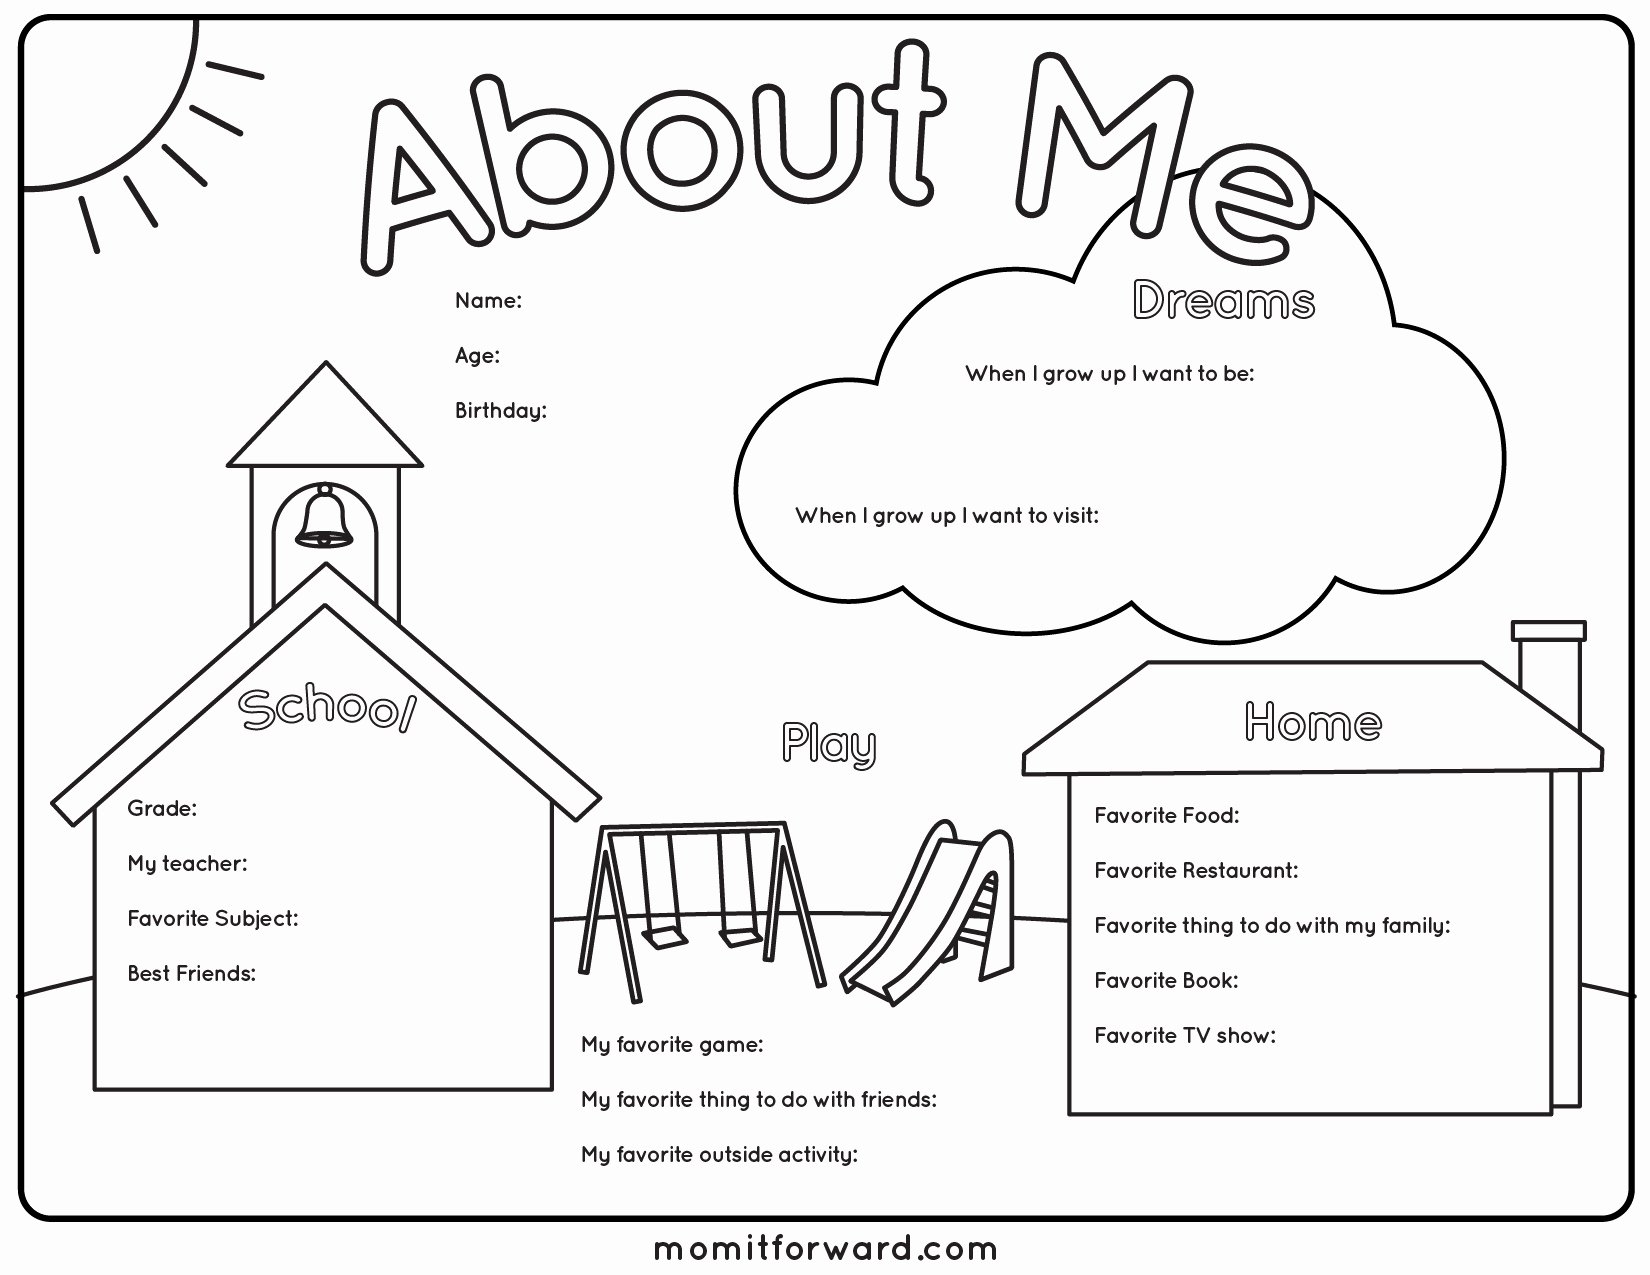 All About Me Worksheet Awesome All About Me Worksheetstake the Pen